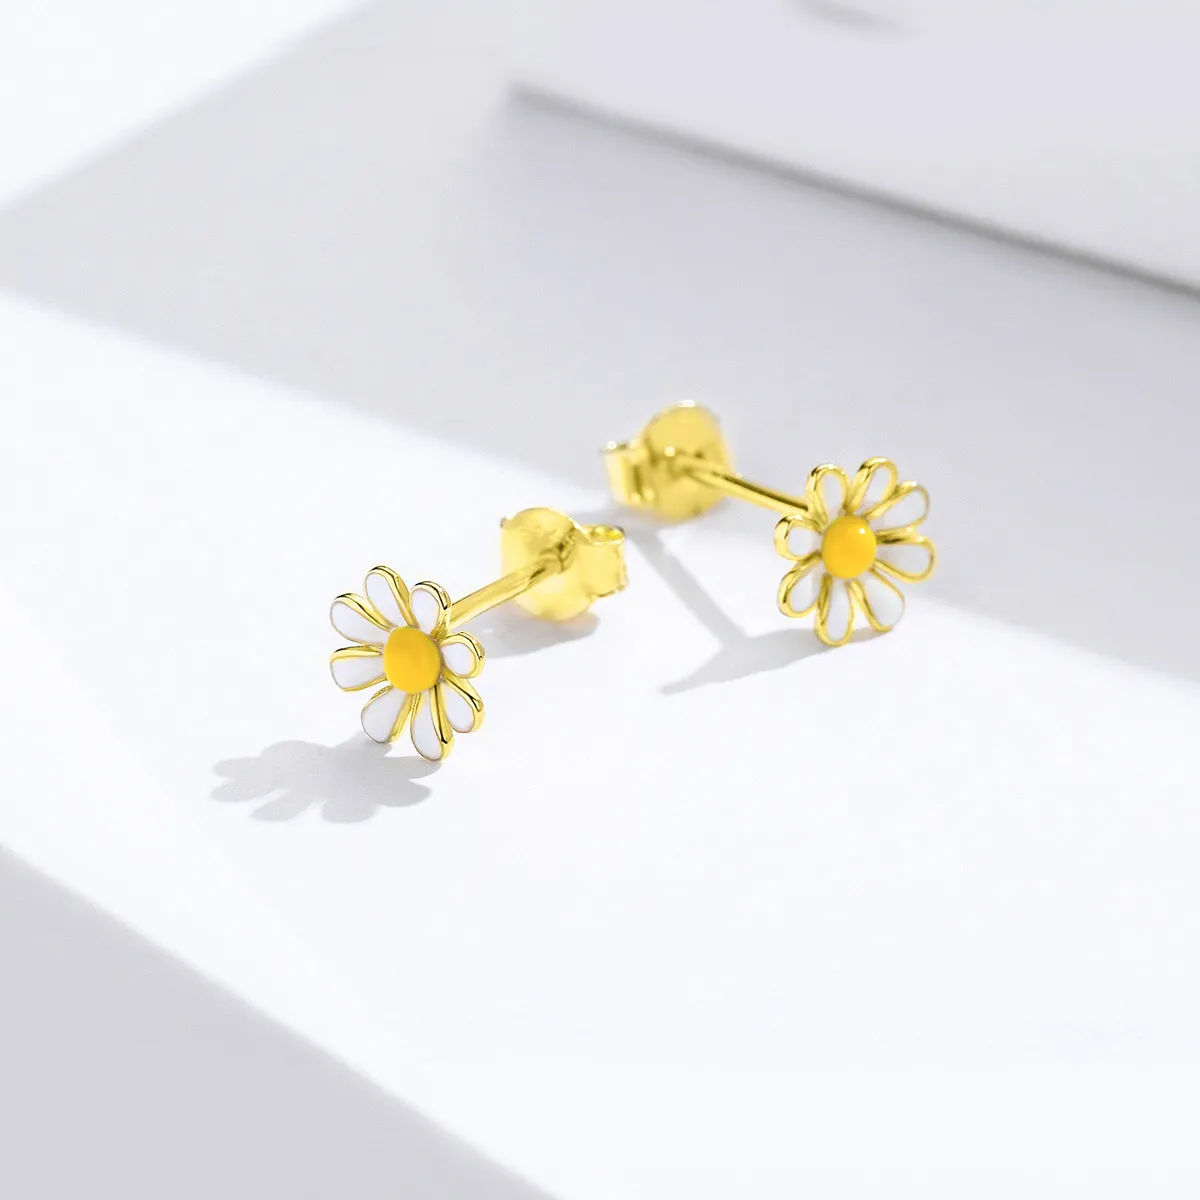 Pandora Style 18ct Gold Plated Daisy Stud Earrings - BSE203